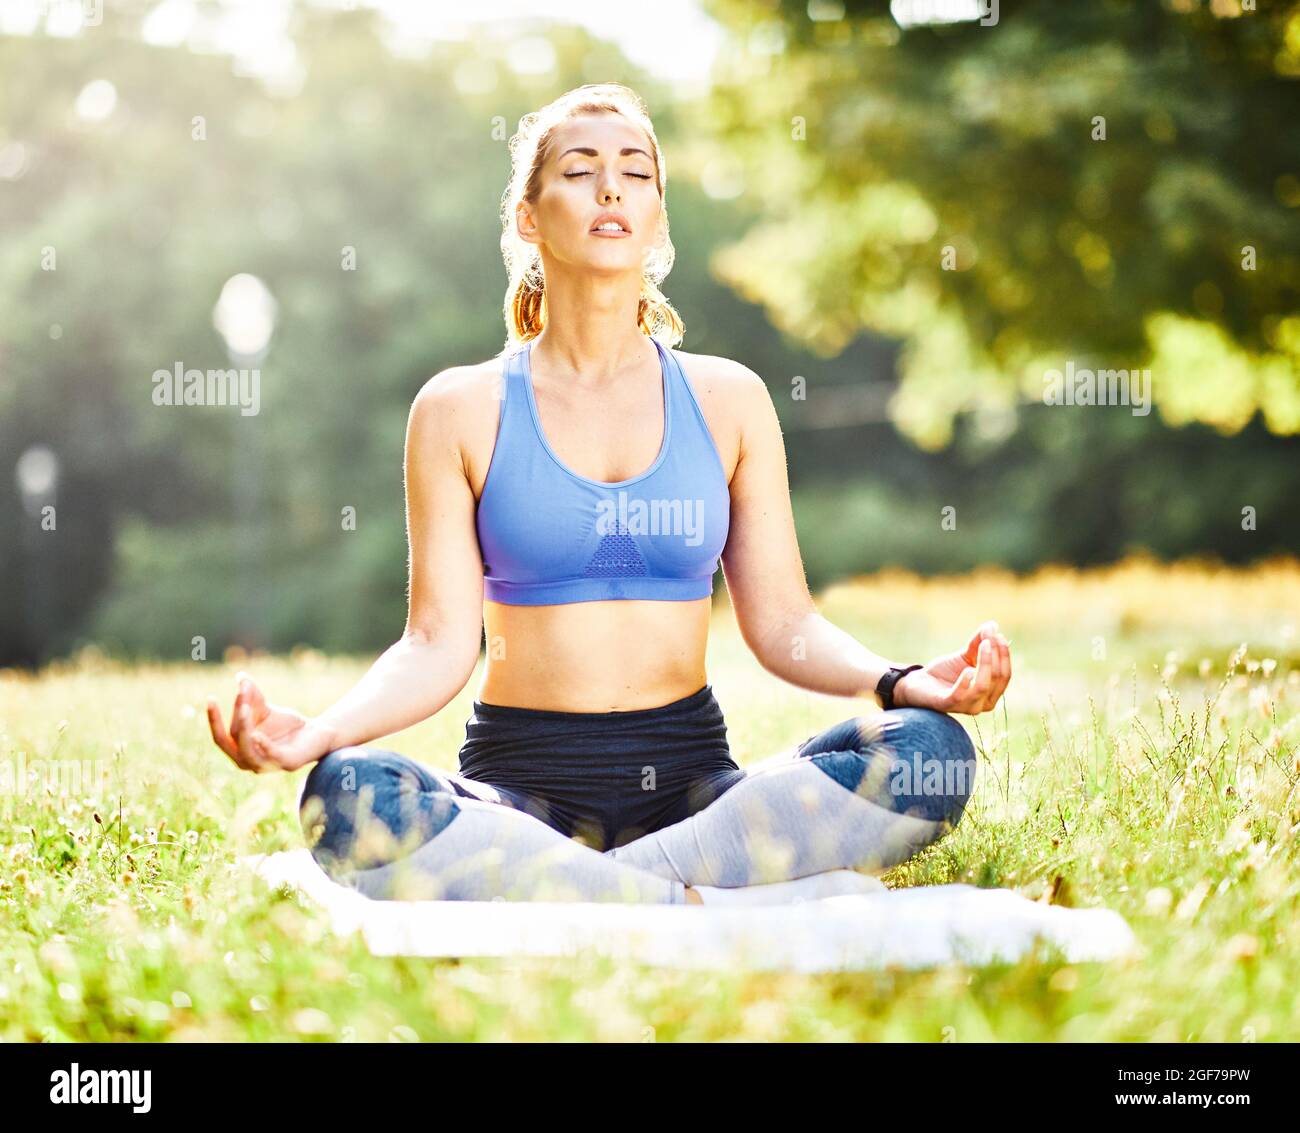 woman yoga park outdoor lifestyle nature healthy fitness sport health exercise relaxation Stock Photo